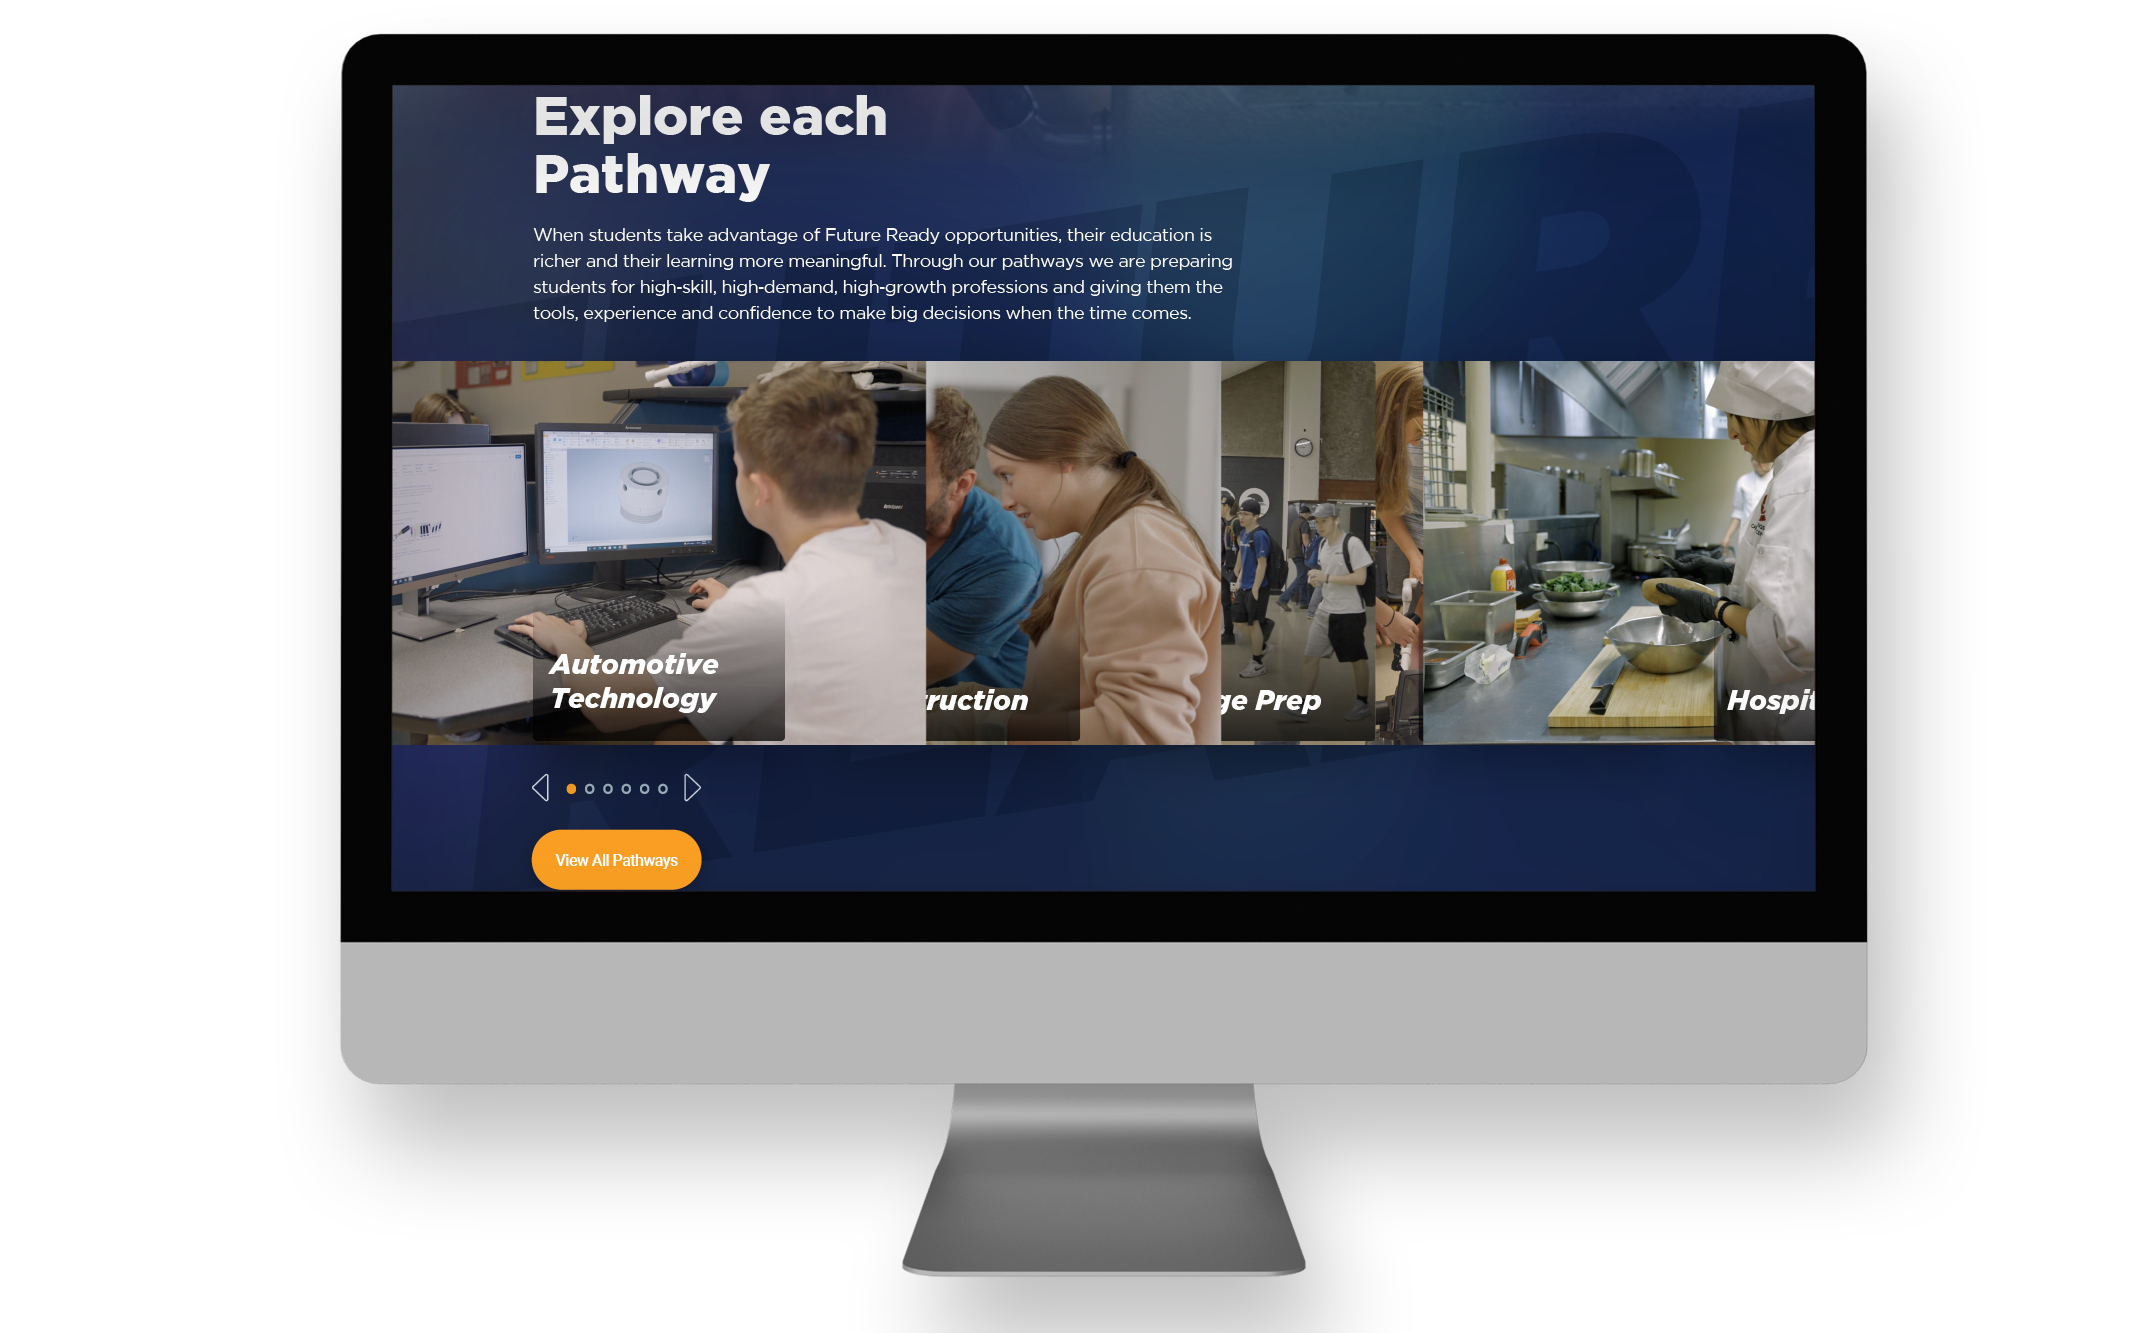 UX principles were implemented in developing this public education program website. 